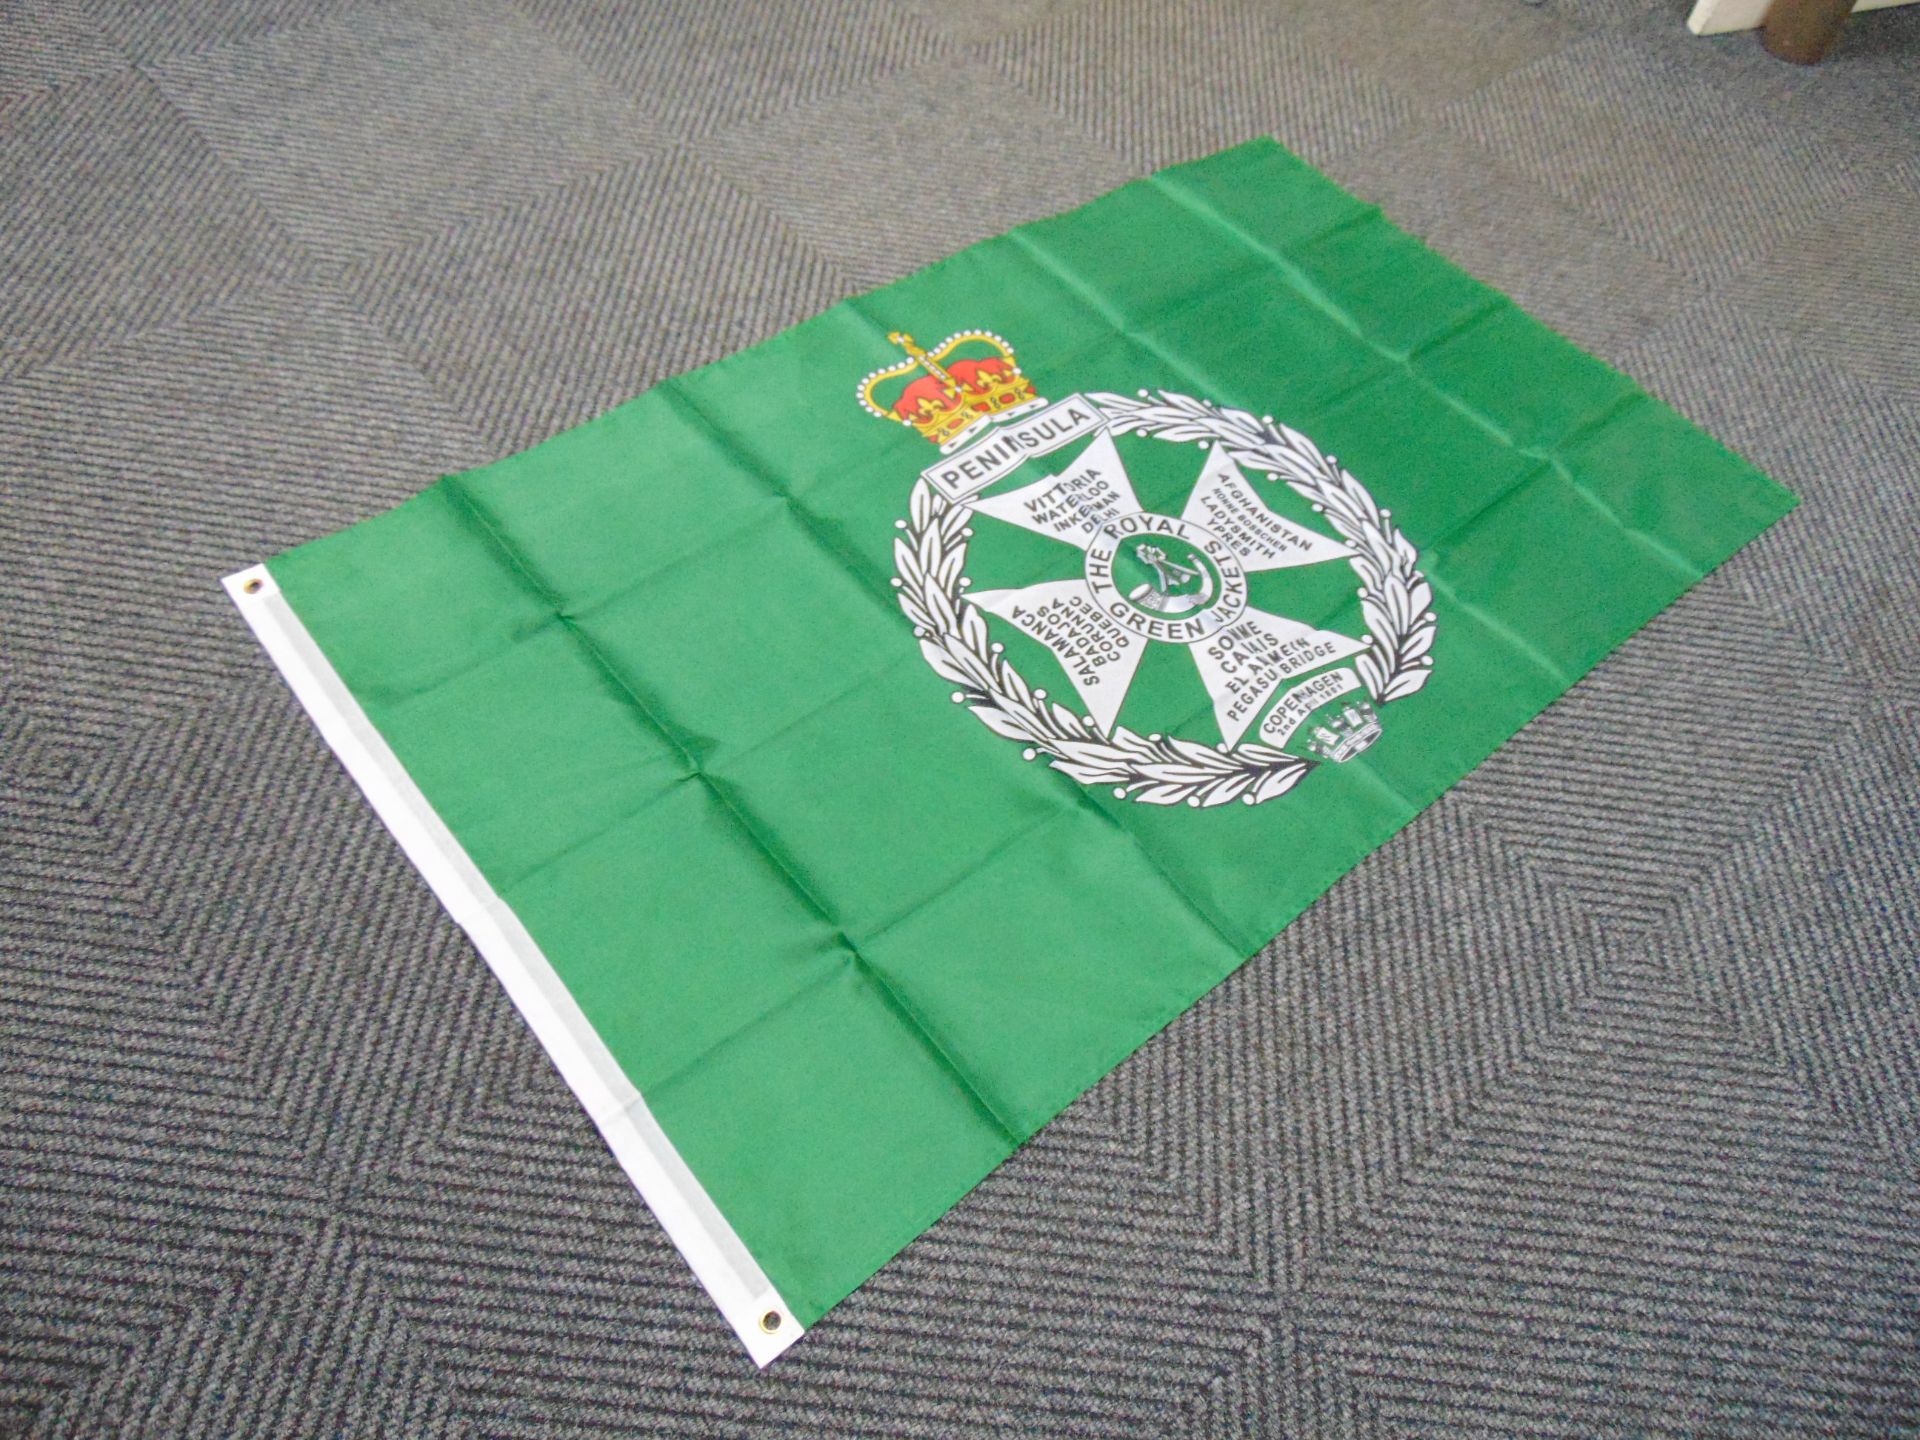 Royal Green Jackets Flag - 5ft x 3ft with Metal Eyelets. - Image 5 of 5